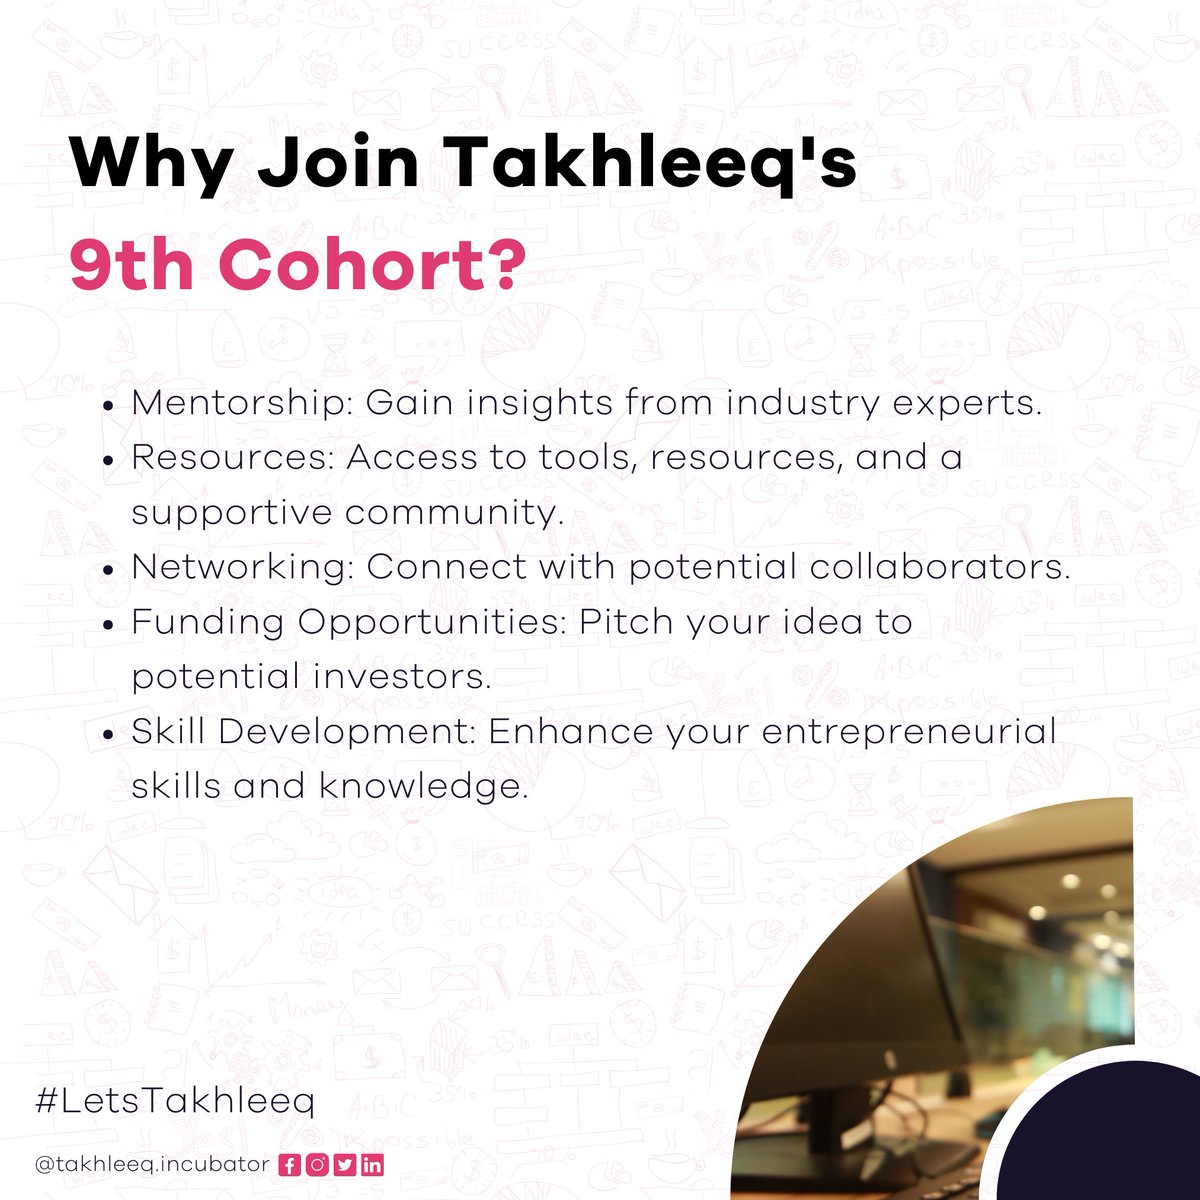 If you're passionate about entrepreneurship and ready to take your idea to the next level, Takhleeq's 9th Cohort is the place to be. Stay tuned for updates as applications will be opening soon! #letstakhleeq #ucp #cohort9